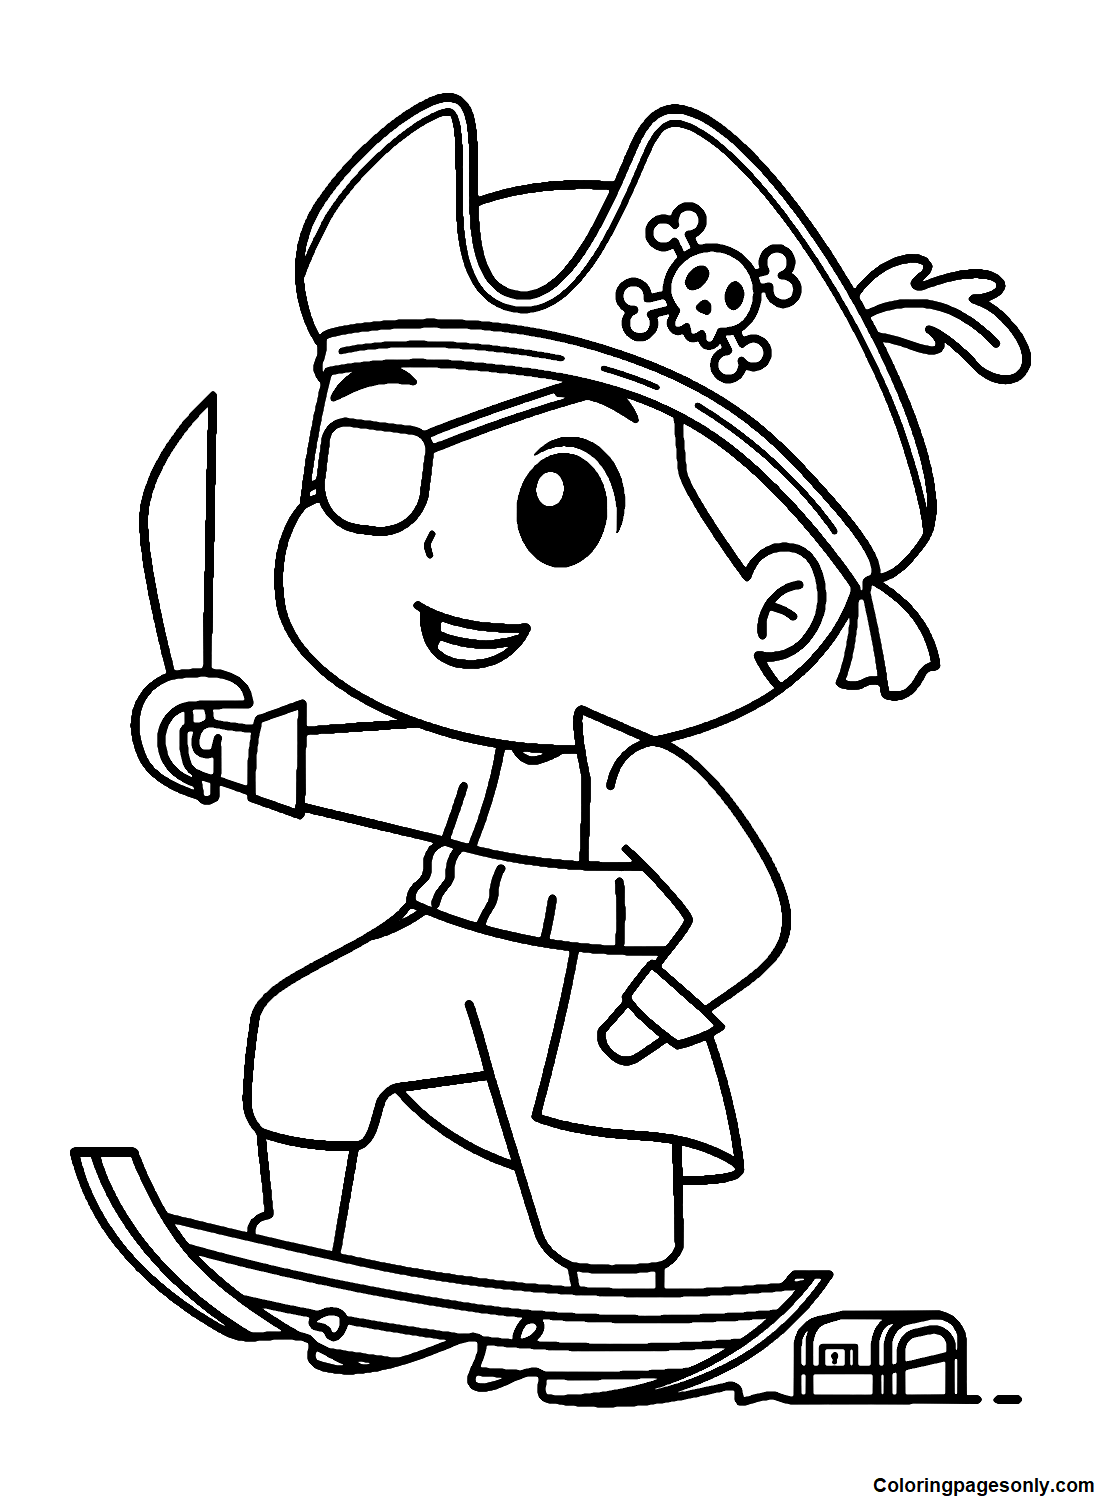 Cute Pirate Boy Coloring Pages